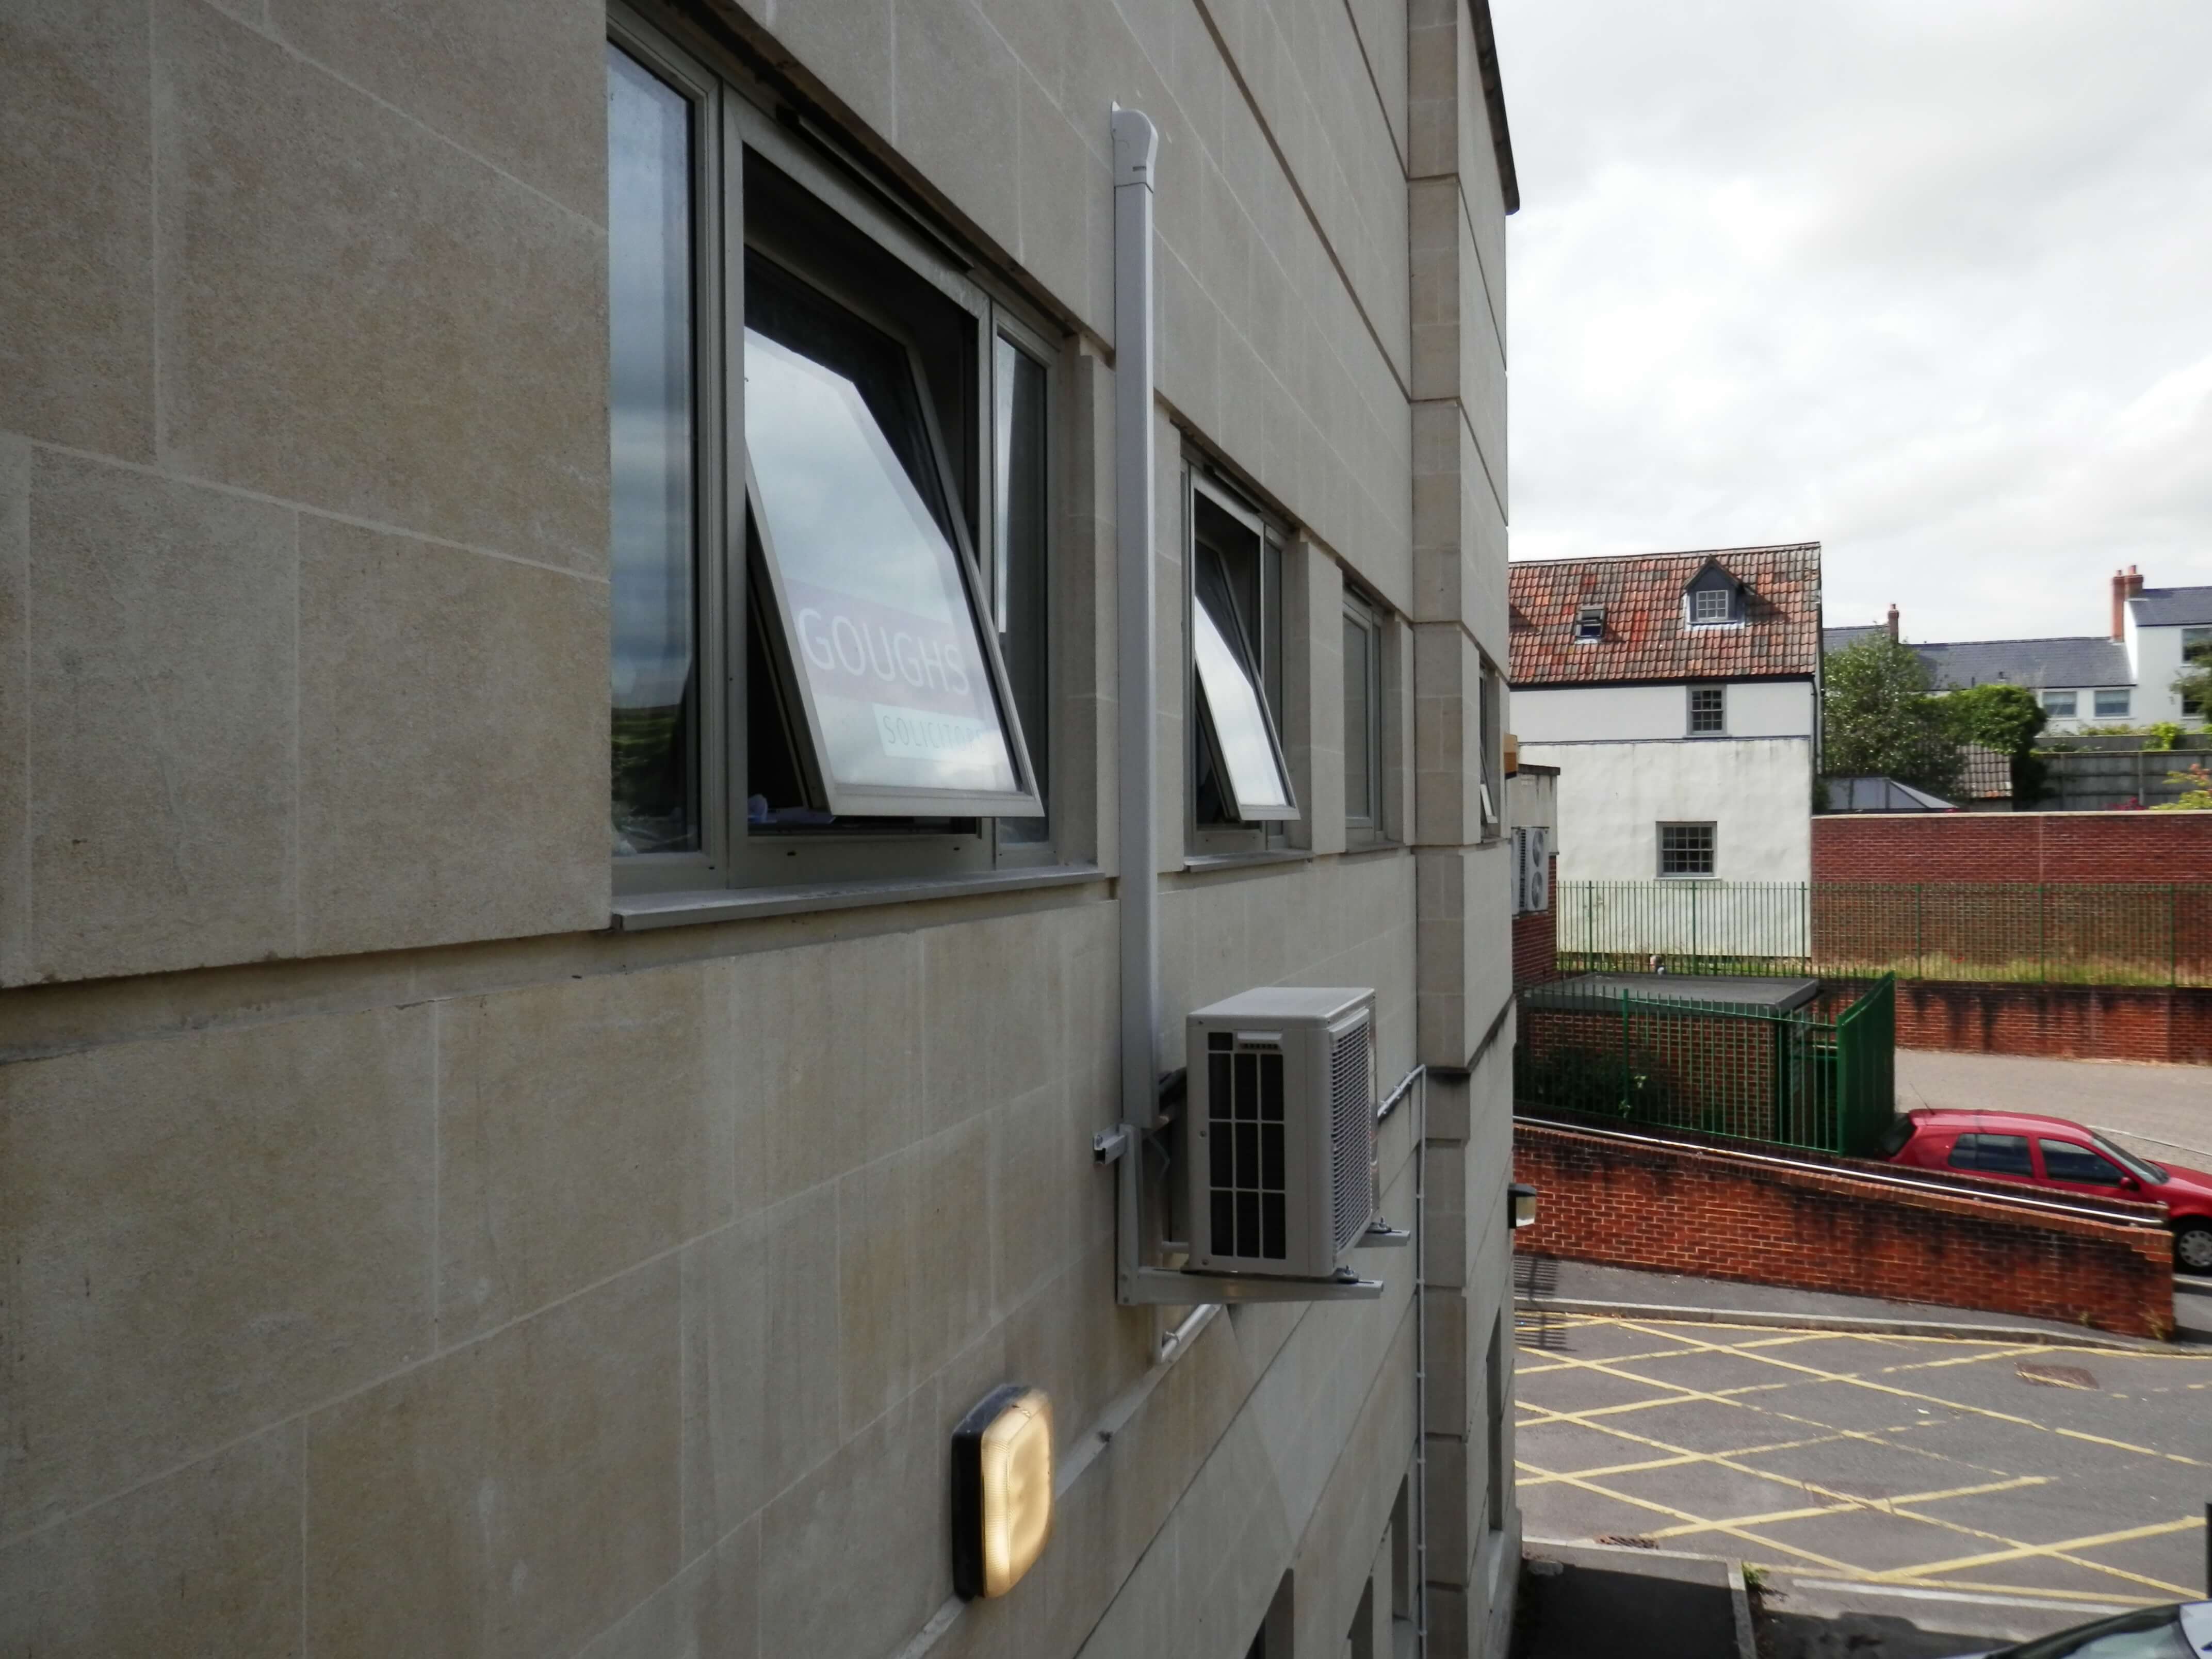 Air conditioning installed for Goughs in Calne